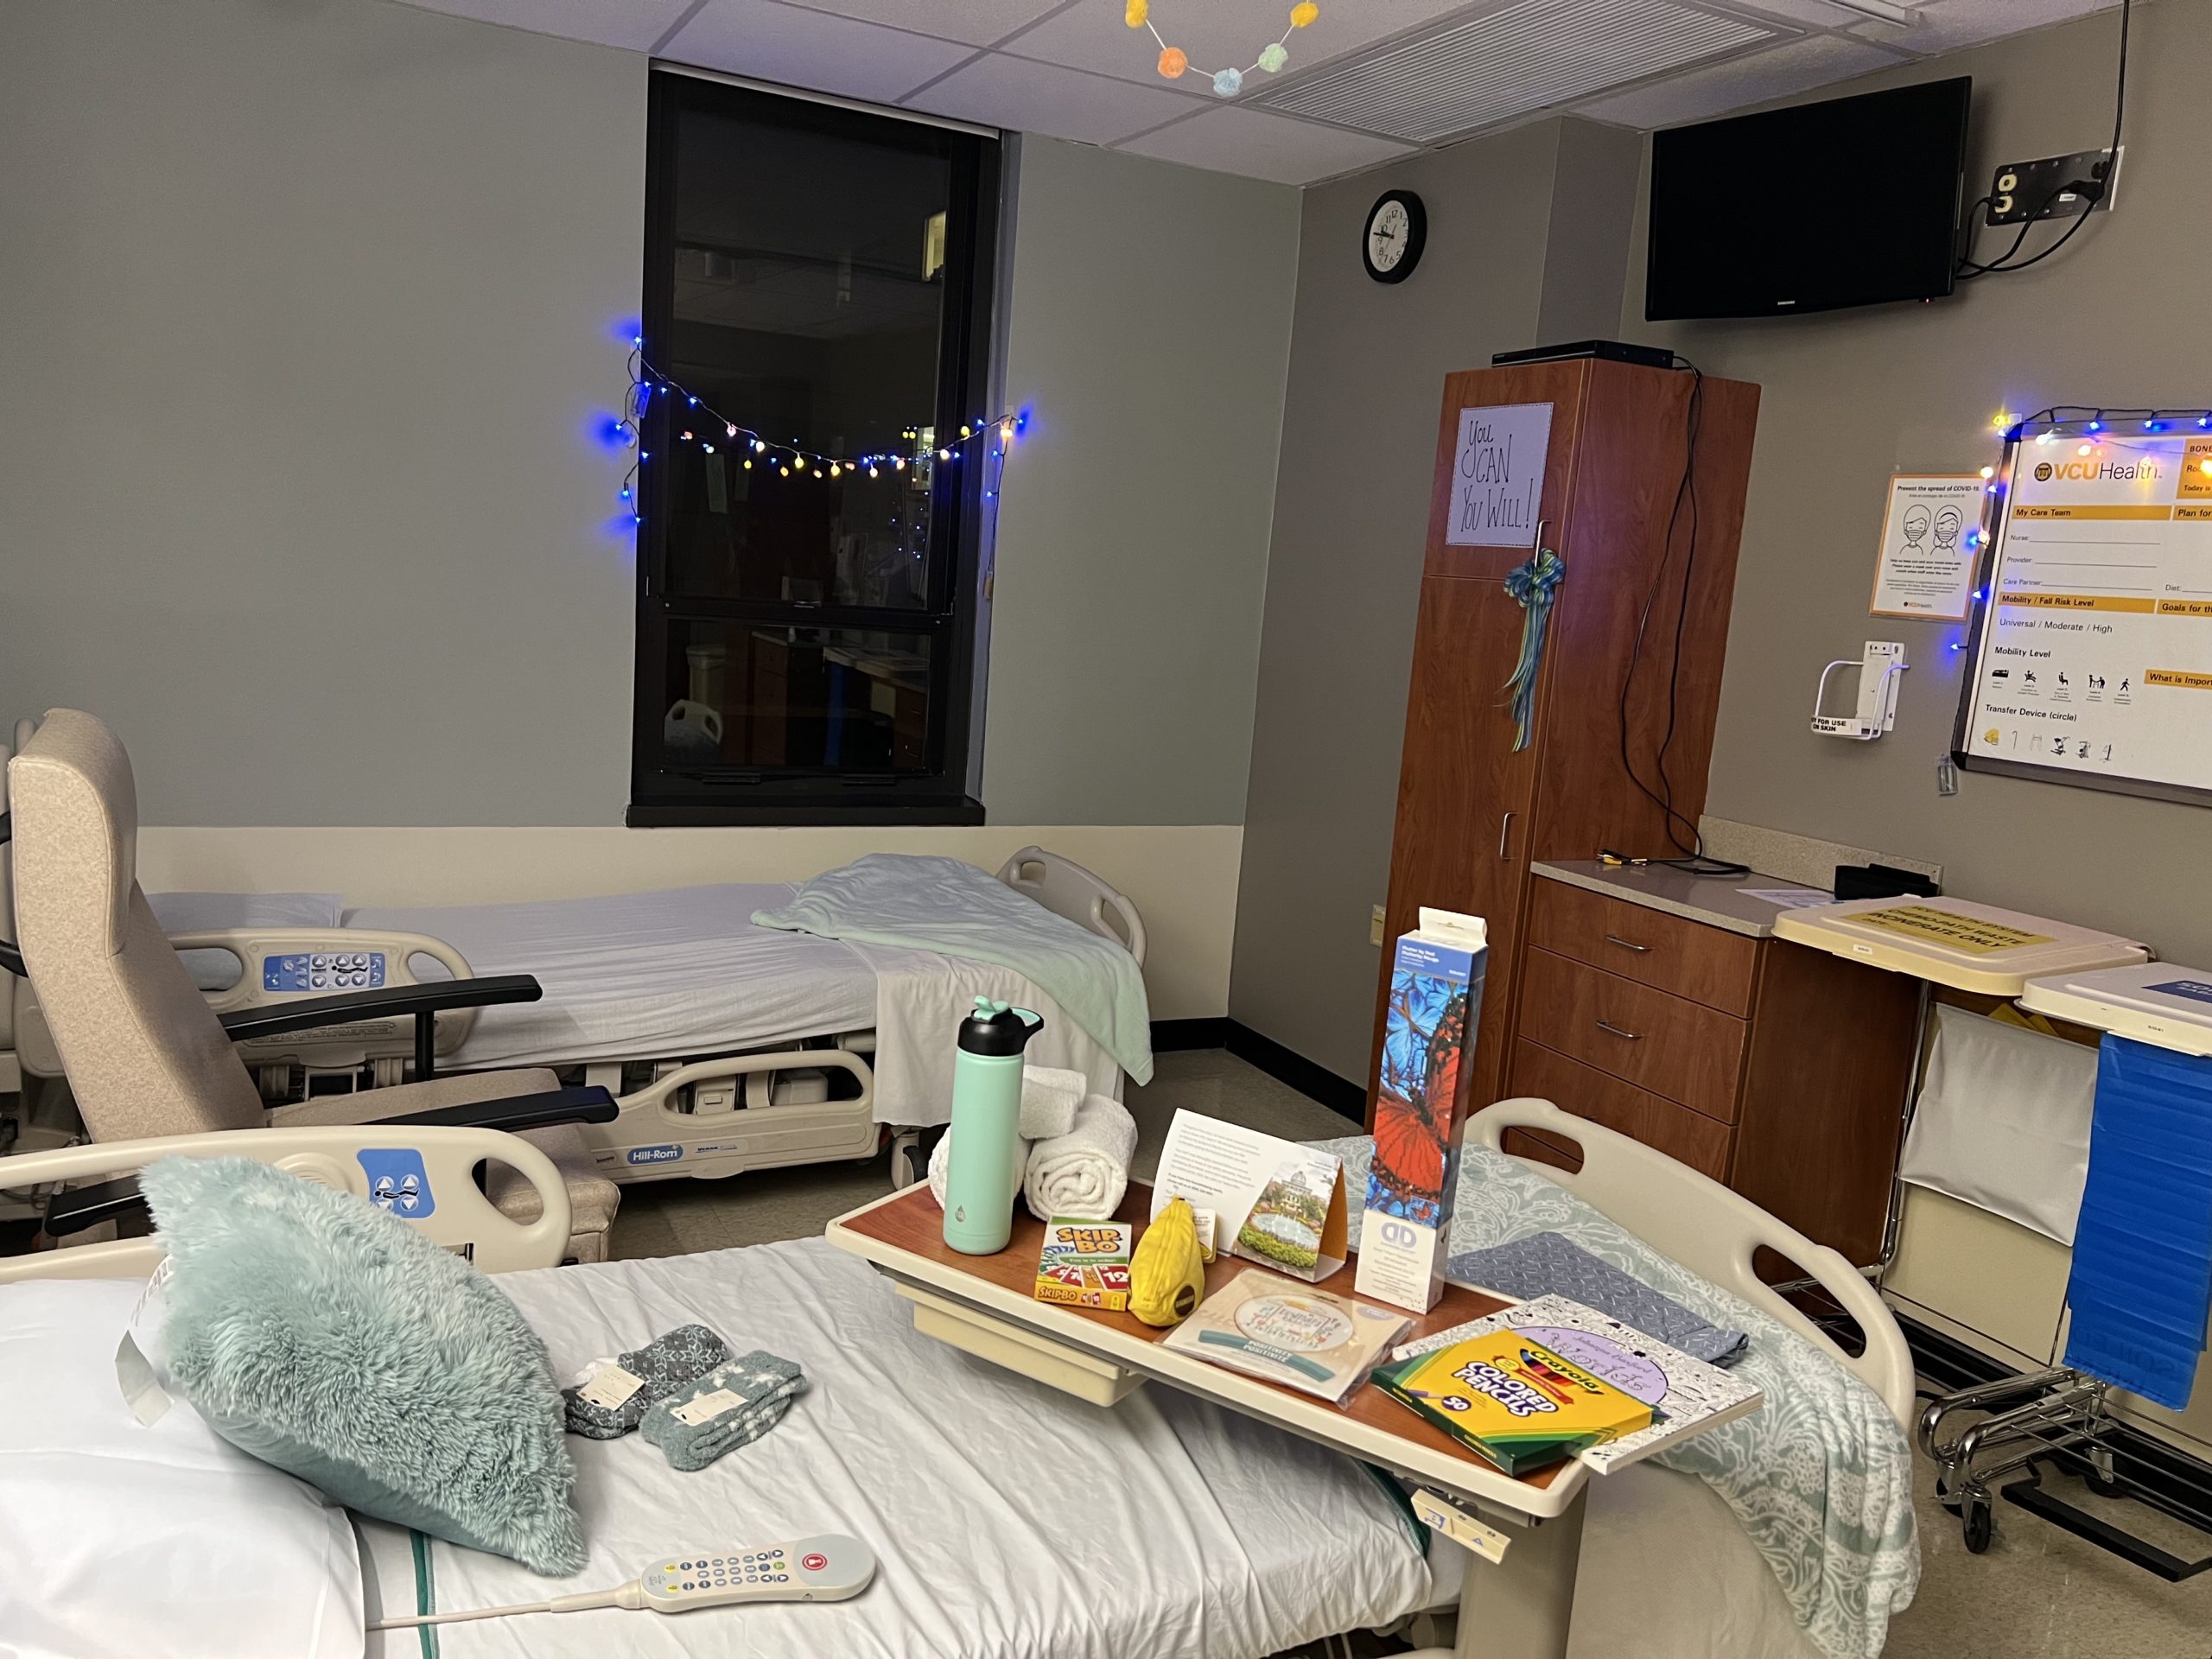 A hospital room with arts and crafts on the bedside table